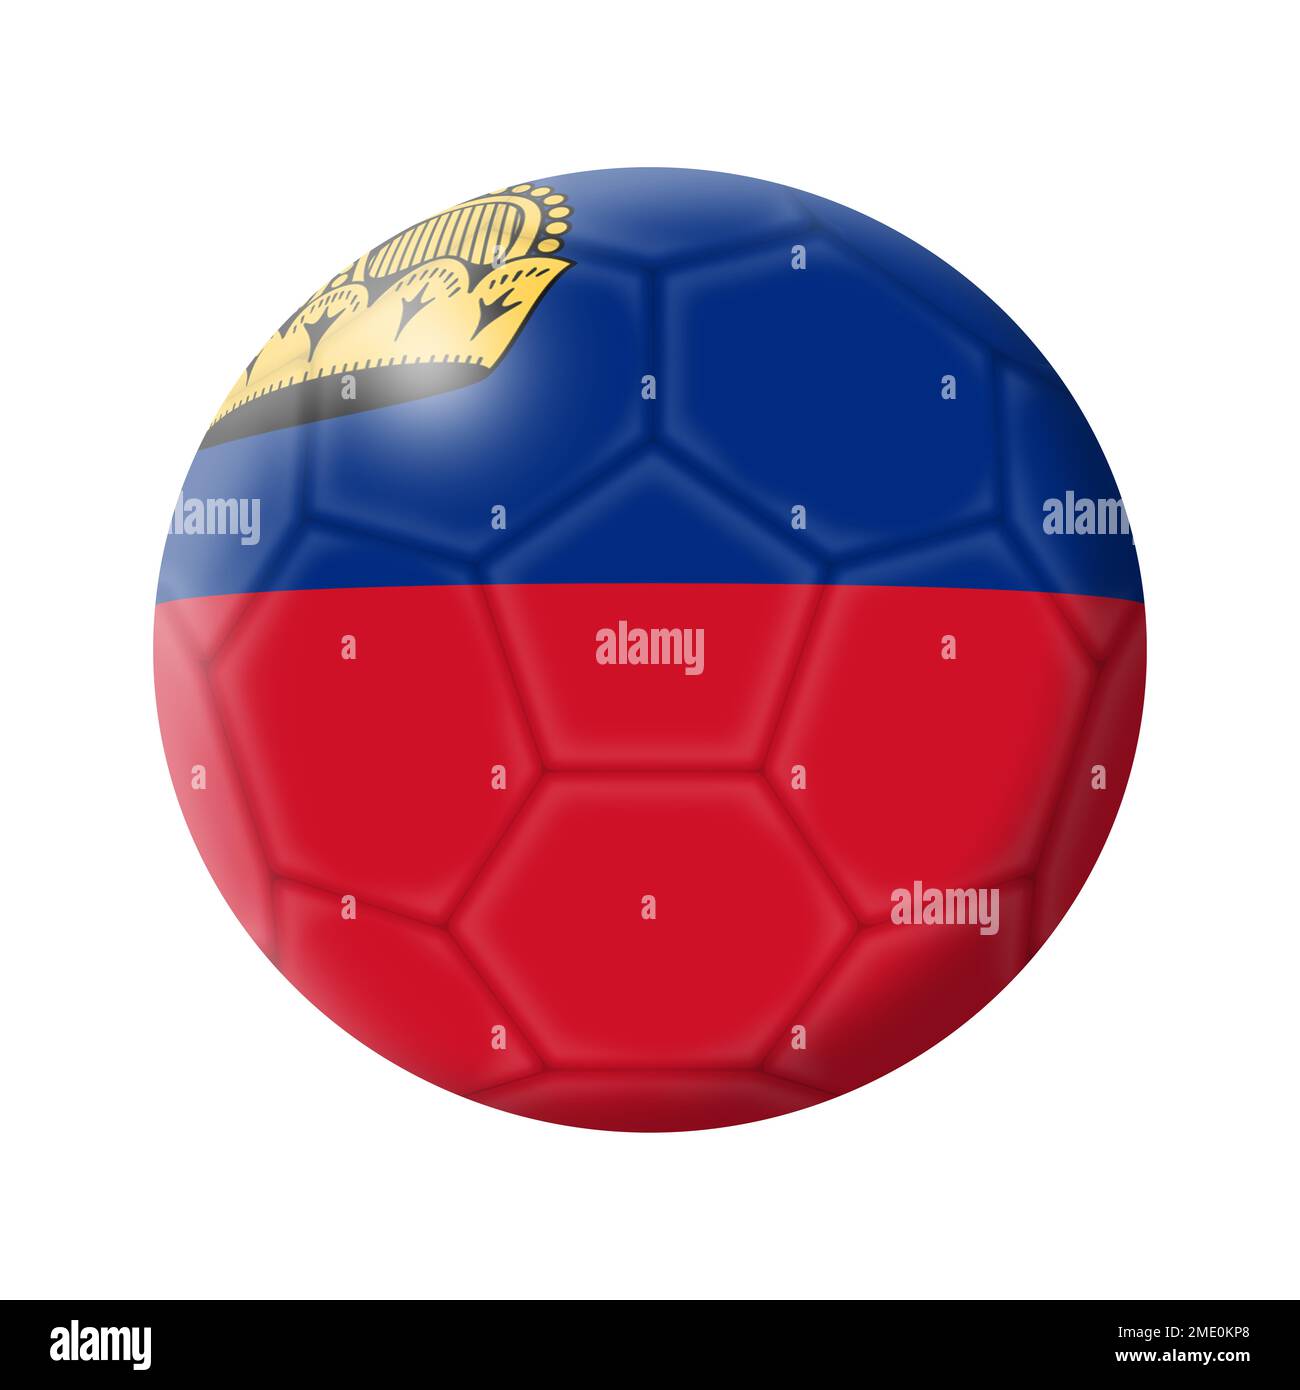 Leichtenstein soccer ball football 3d illustration with clipping path Stock Photo